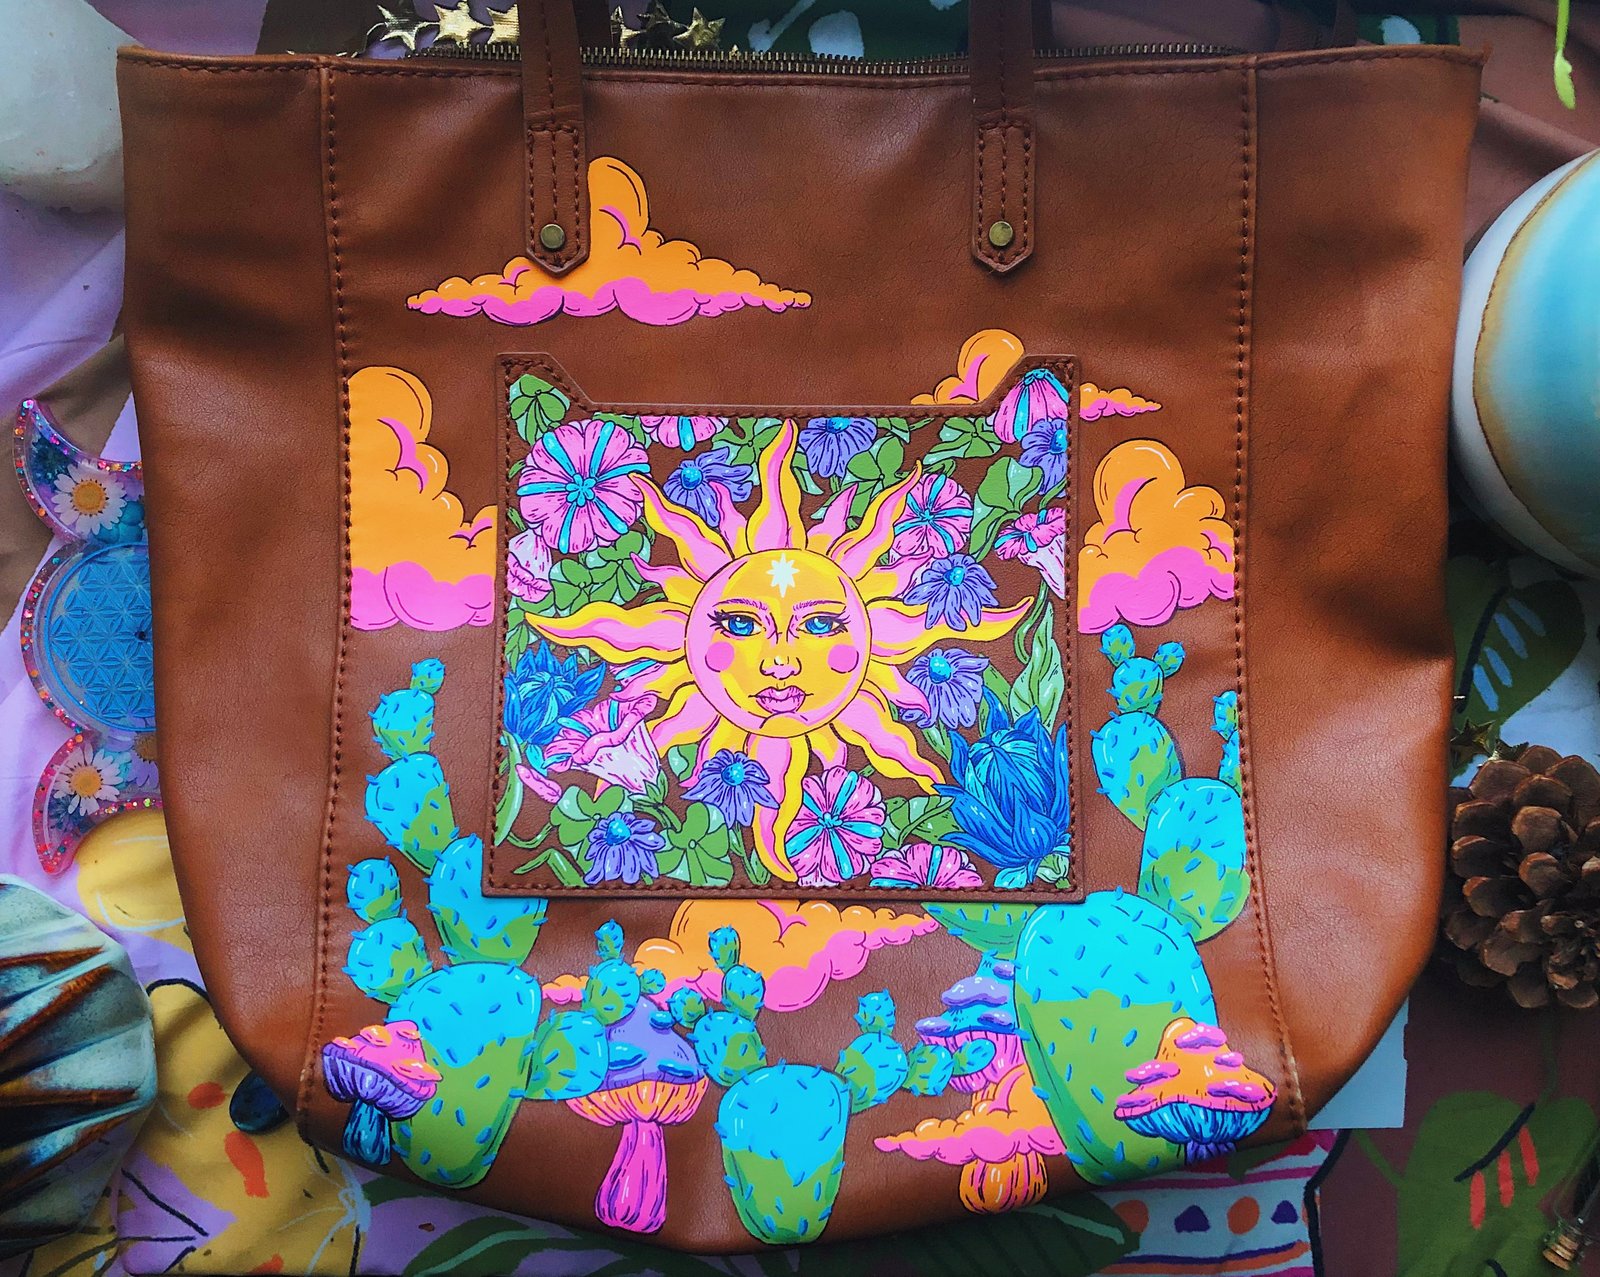 Hand Painted Bag (1) by vntnccvii on DeviantArt